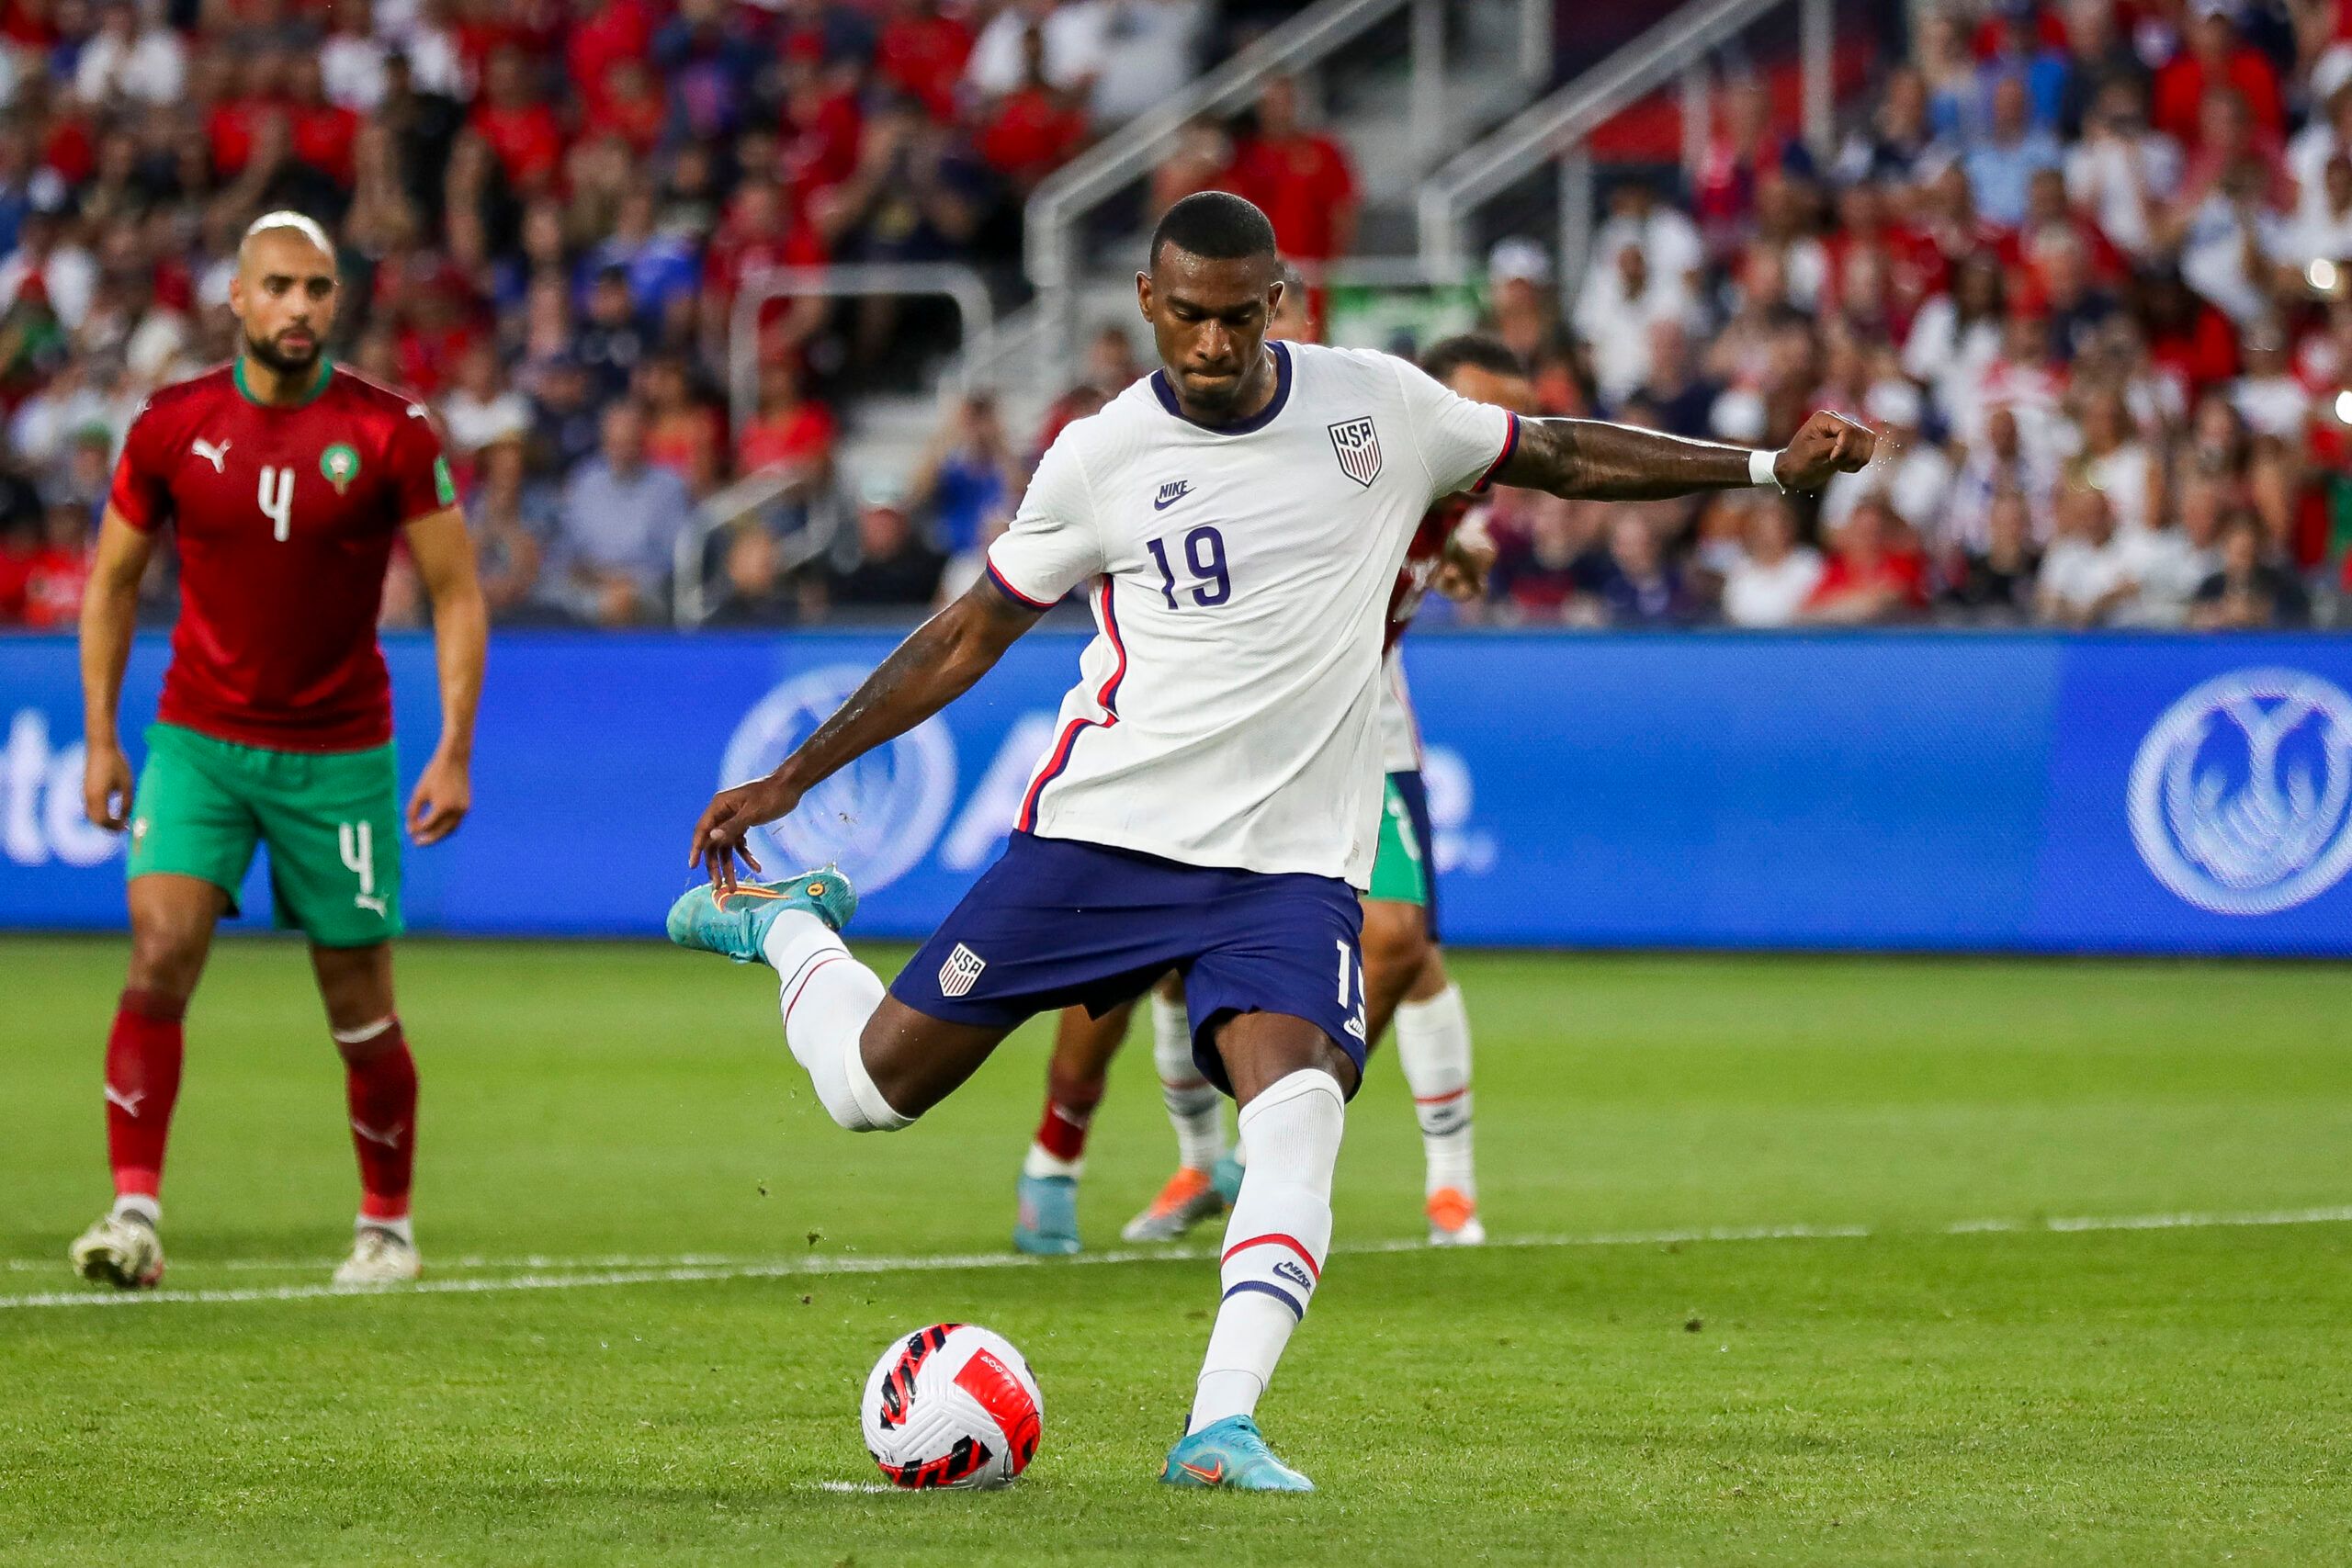 Jun 1, 2022; Cincinnati, Ohio, USA; the United States forward Haji Wright (19) shoots and scores a goal on a penalty kick against Morocco in the second half during an International friendly soccer match at TQL Stadium. Mandatory Credit: Katie Stratman-USA TODAY Sports